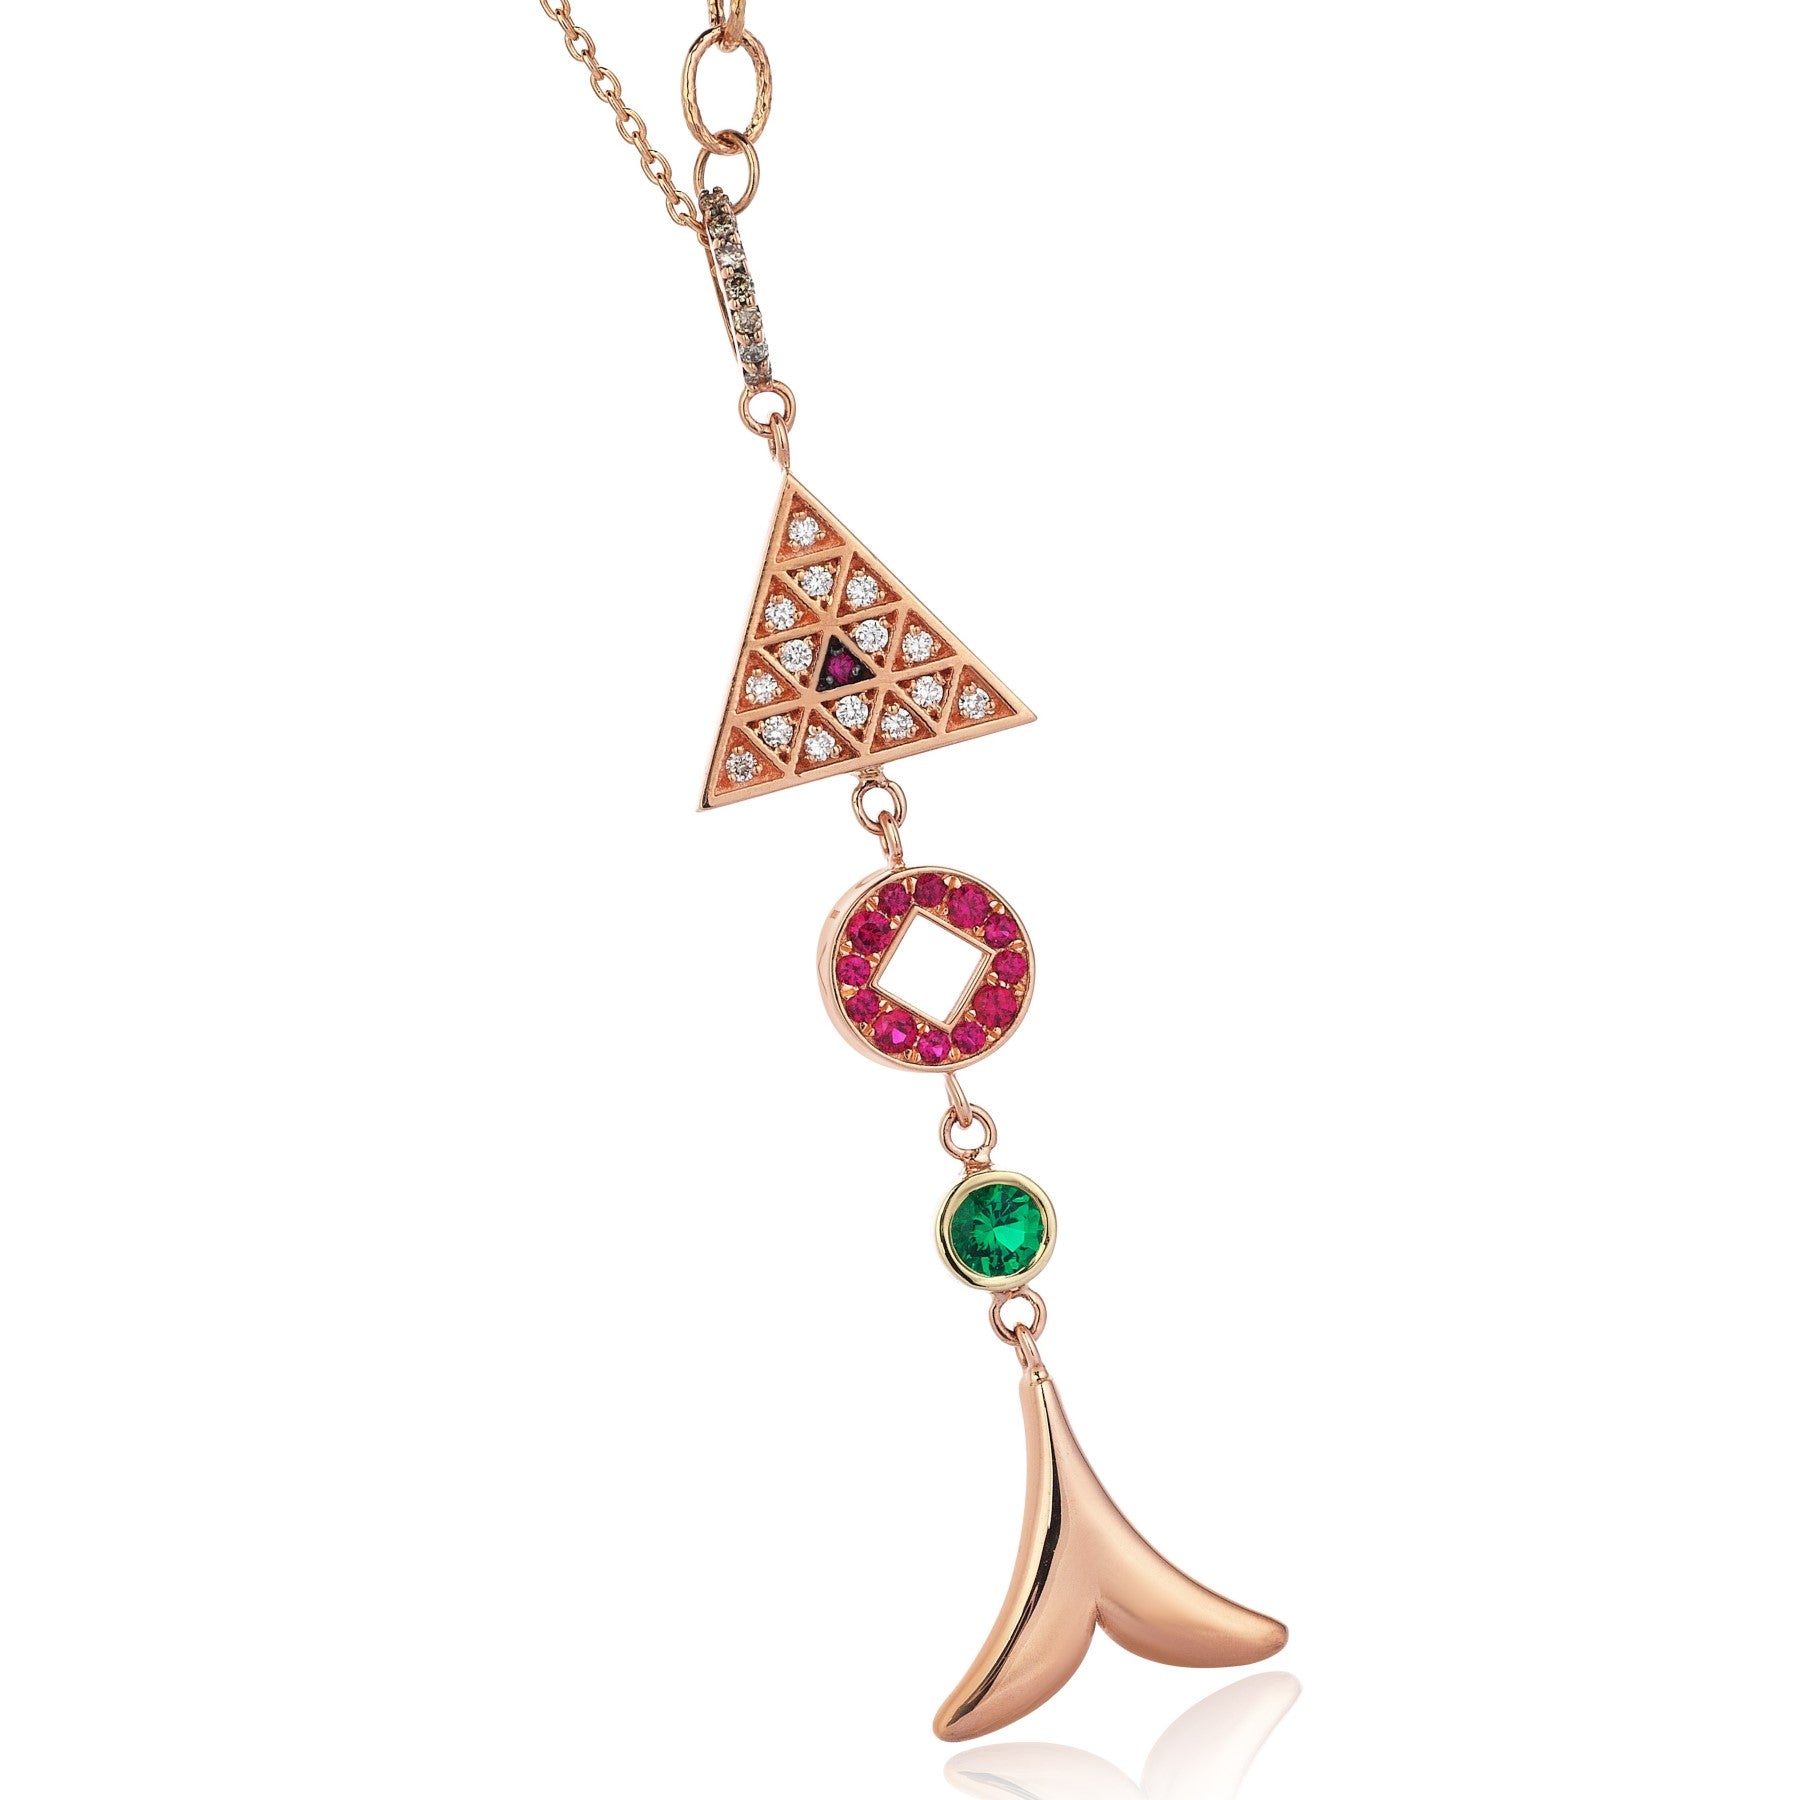 Triangle Head Fish Necklace With Bubbles